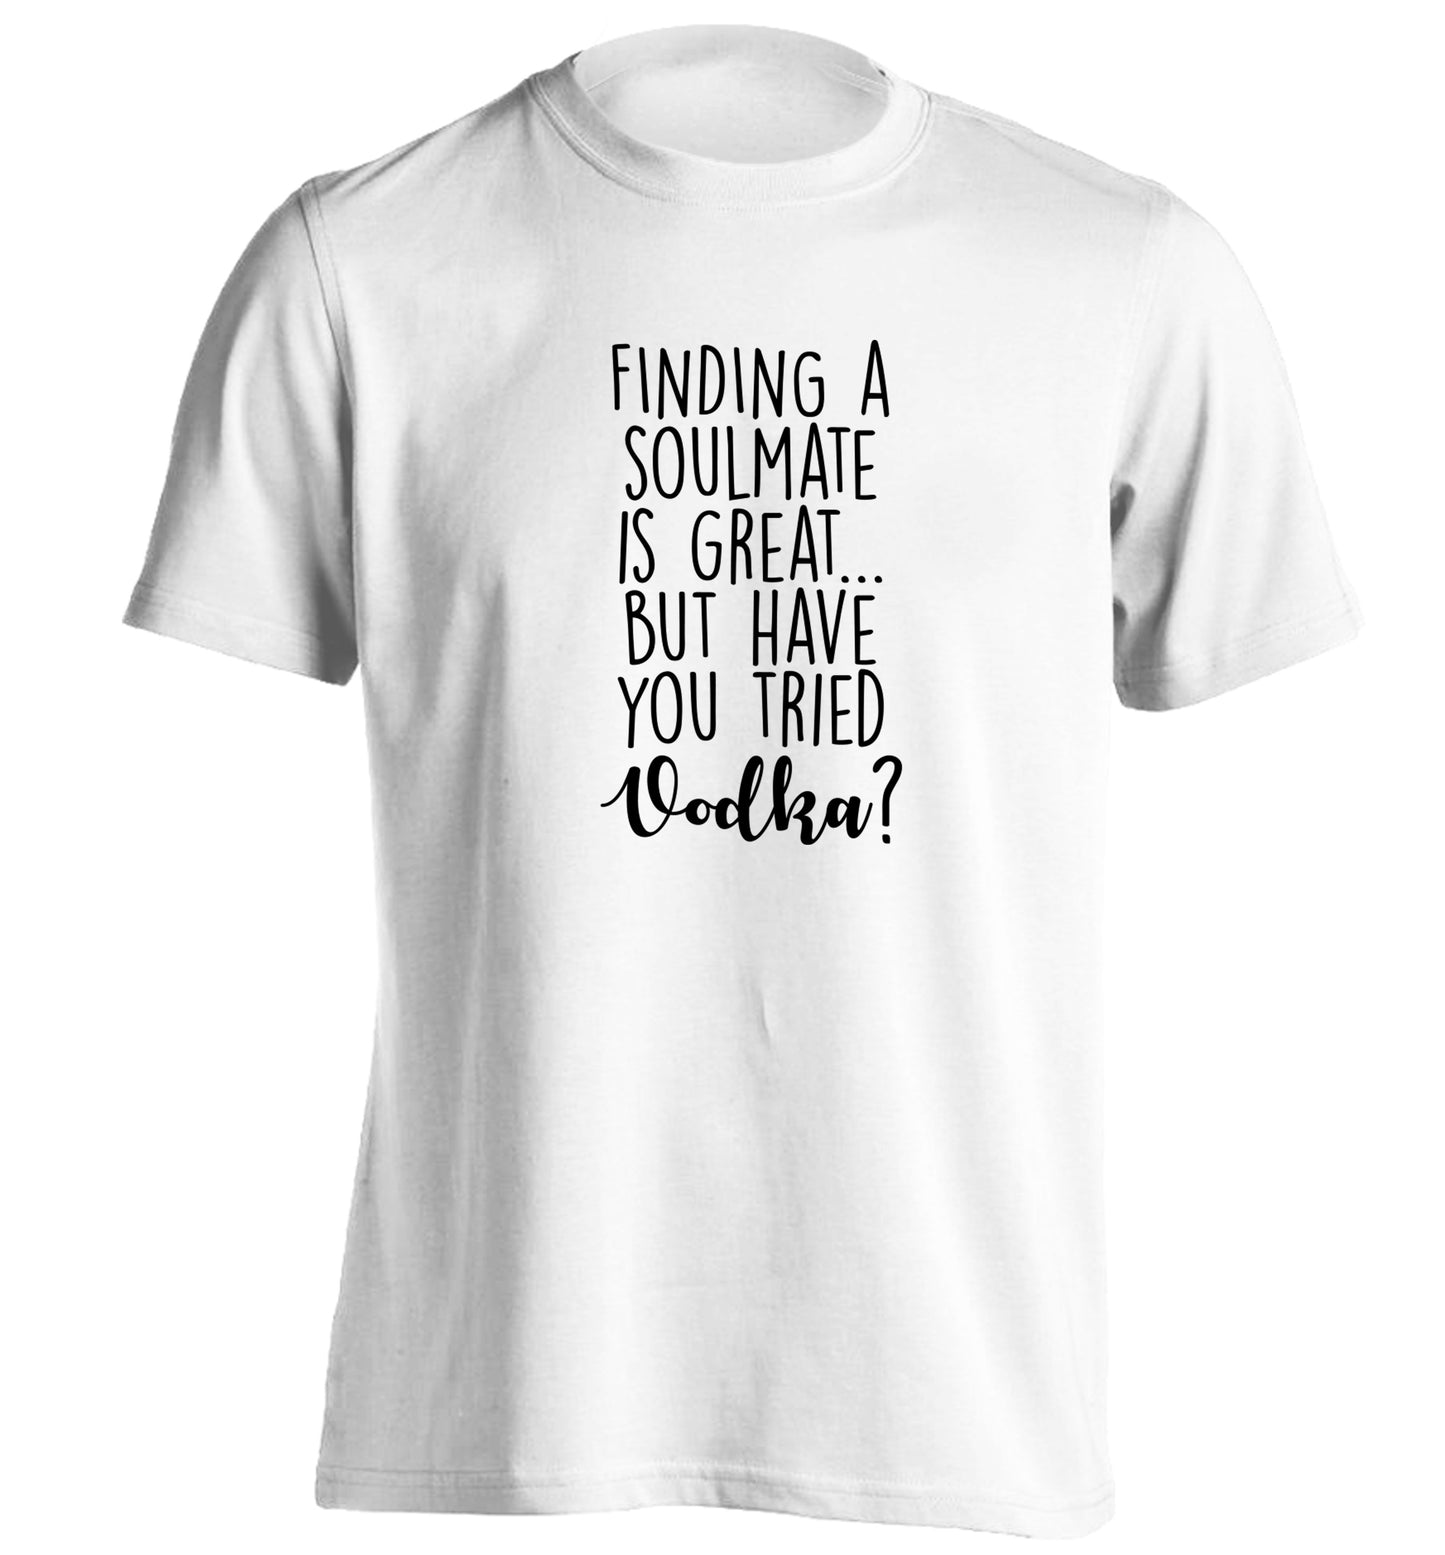 Finding a soulmate is great but have you tried vodka? adults unisex white Tshirt 2XL